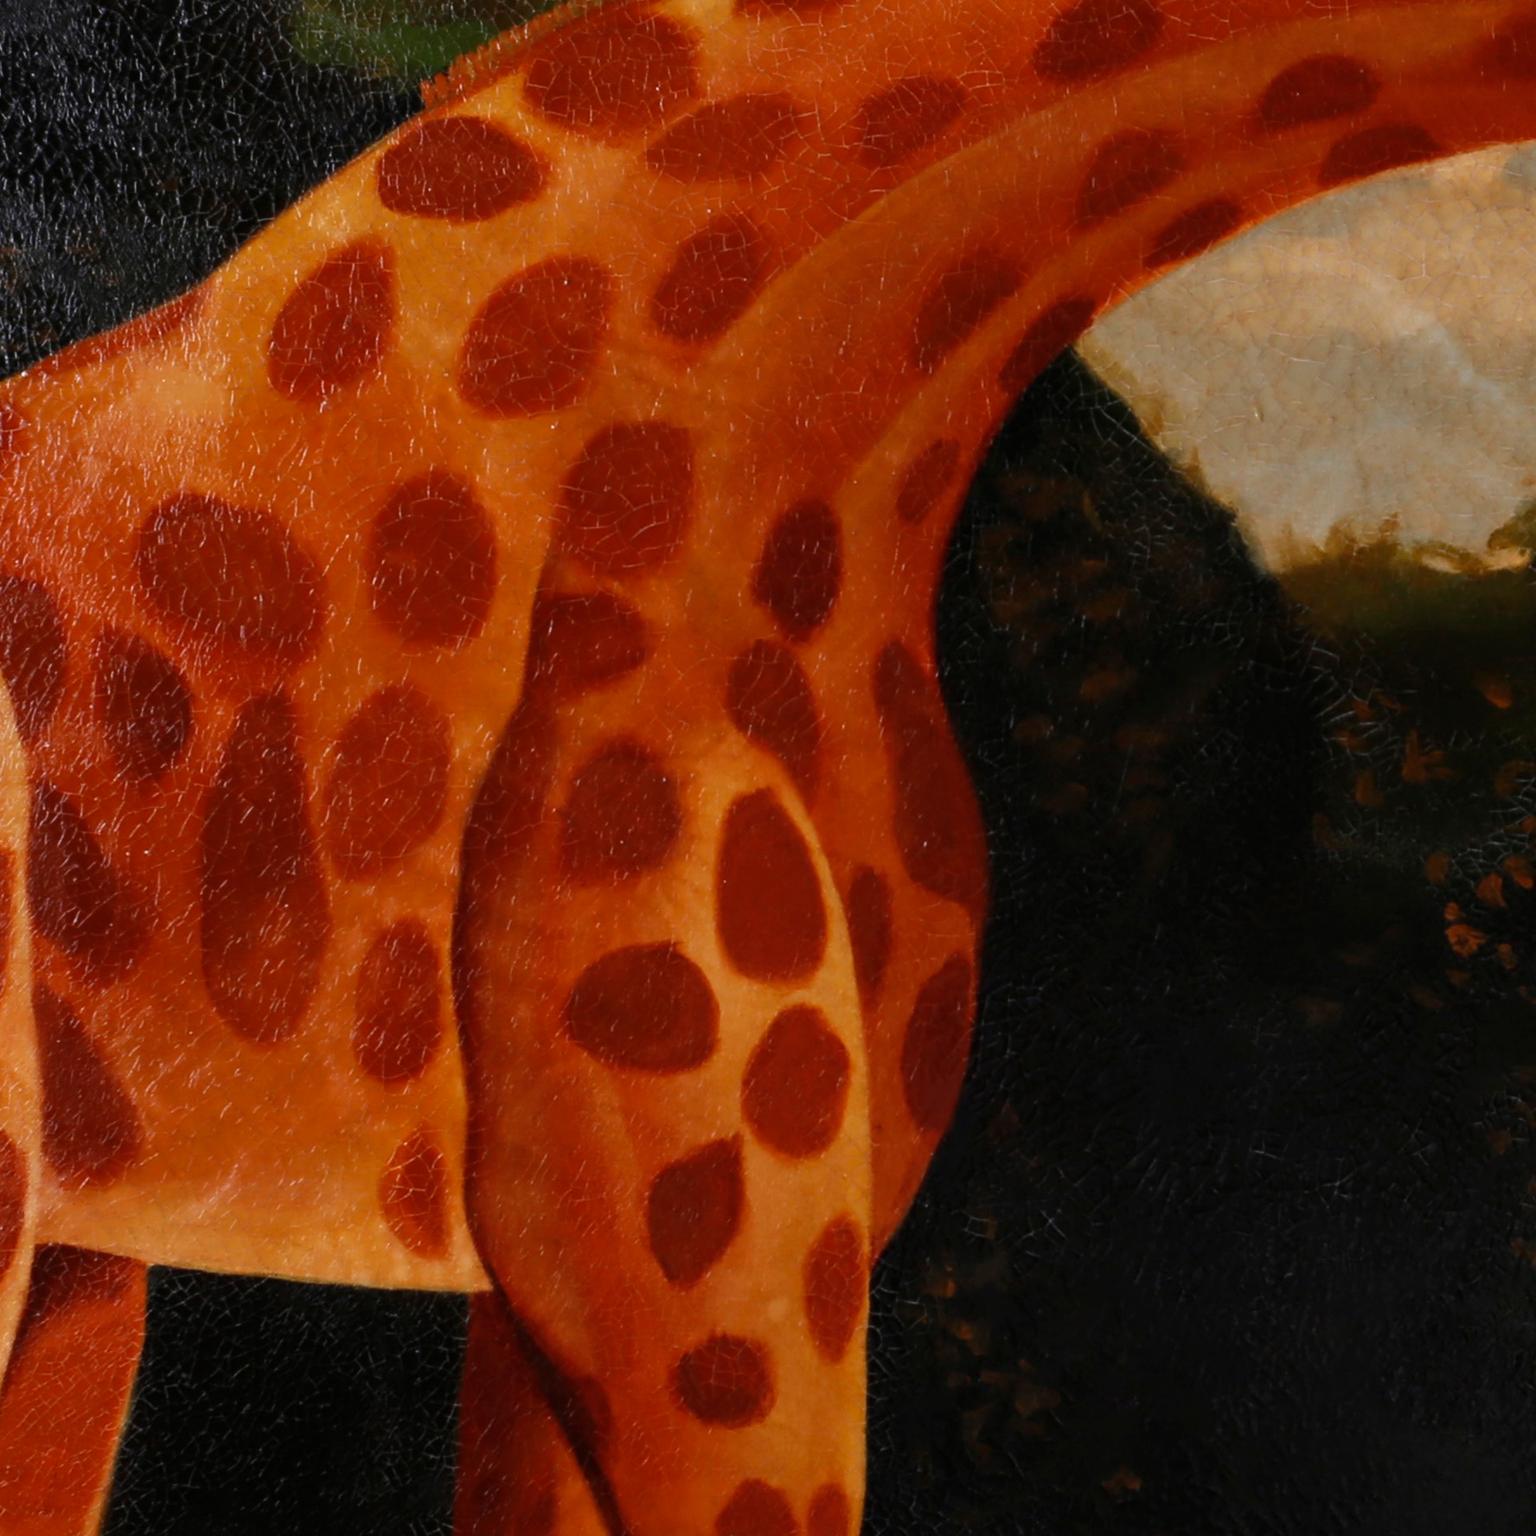 Large and amusing oil painting on canvas of a giraffe and caretaker in an outdoor wooded scene. With a tongue and cheek nod to Victorian parlor paintings, this decorative piece has a contrived orientalist yet folk painting quality with an aged